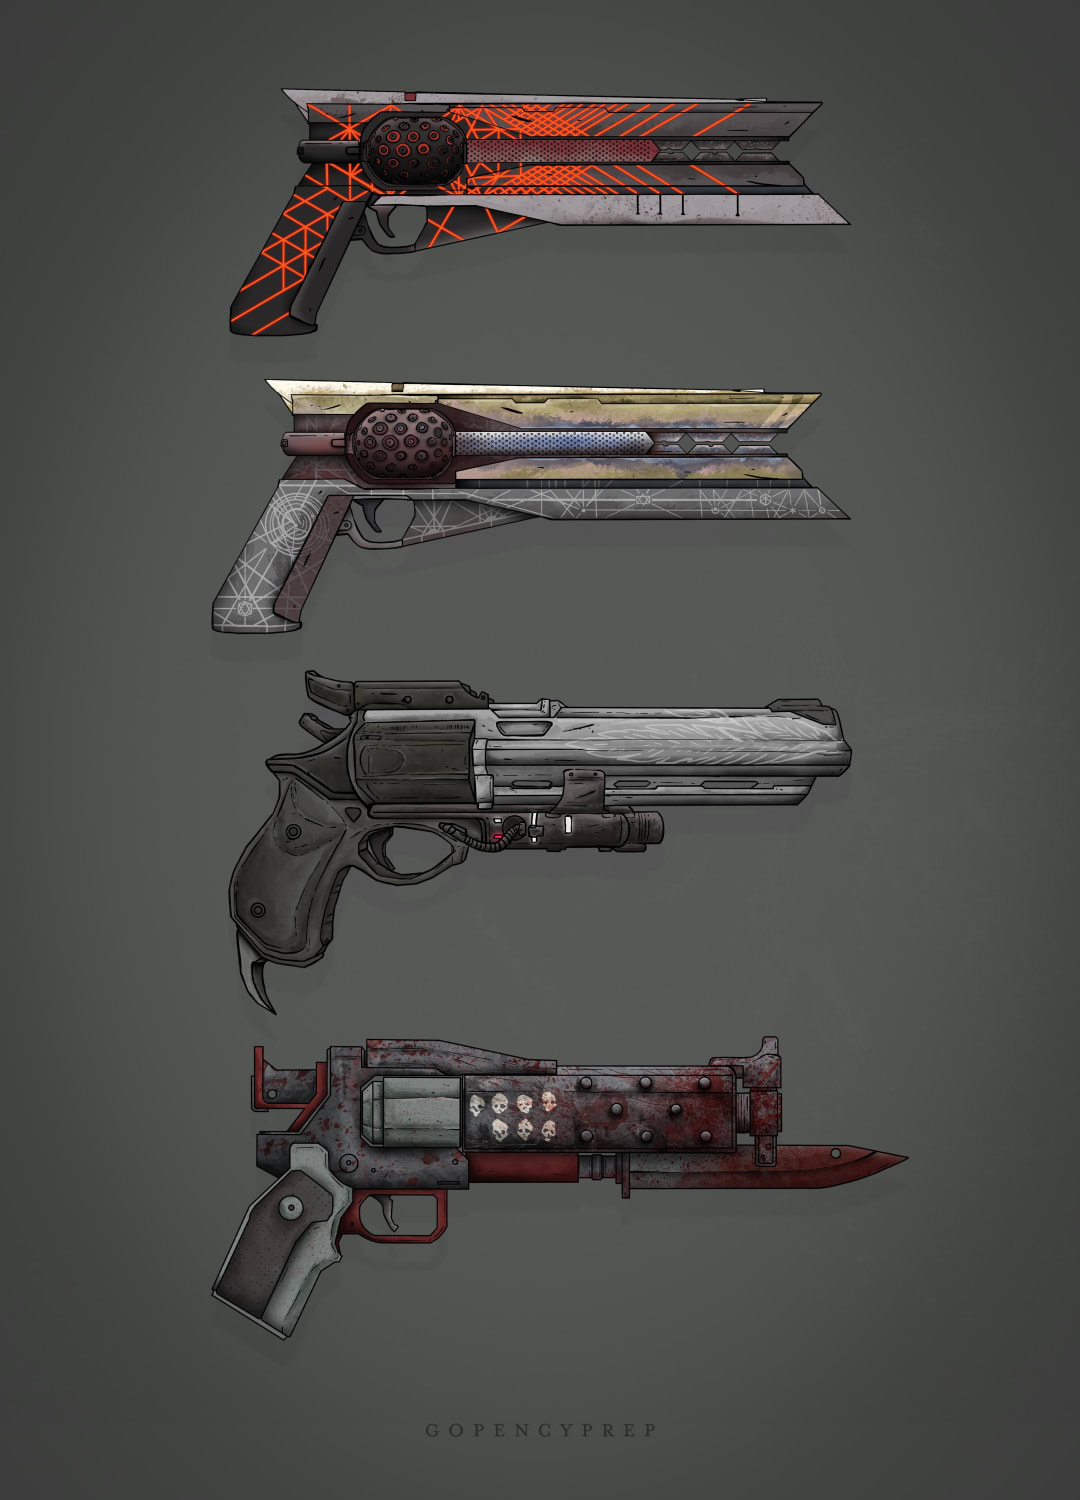 I've been drawing handcannons lately - here's a few: